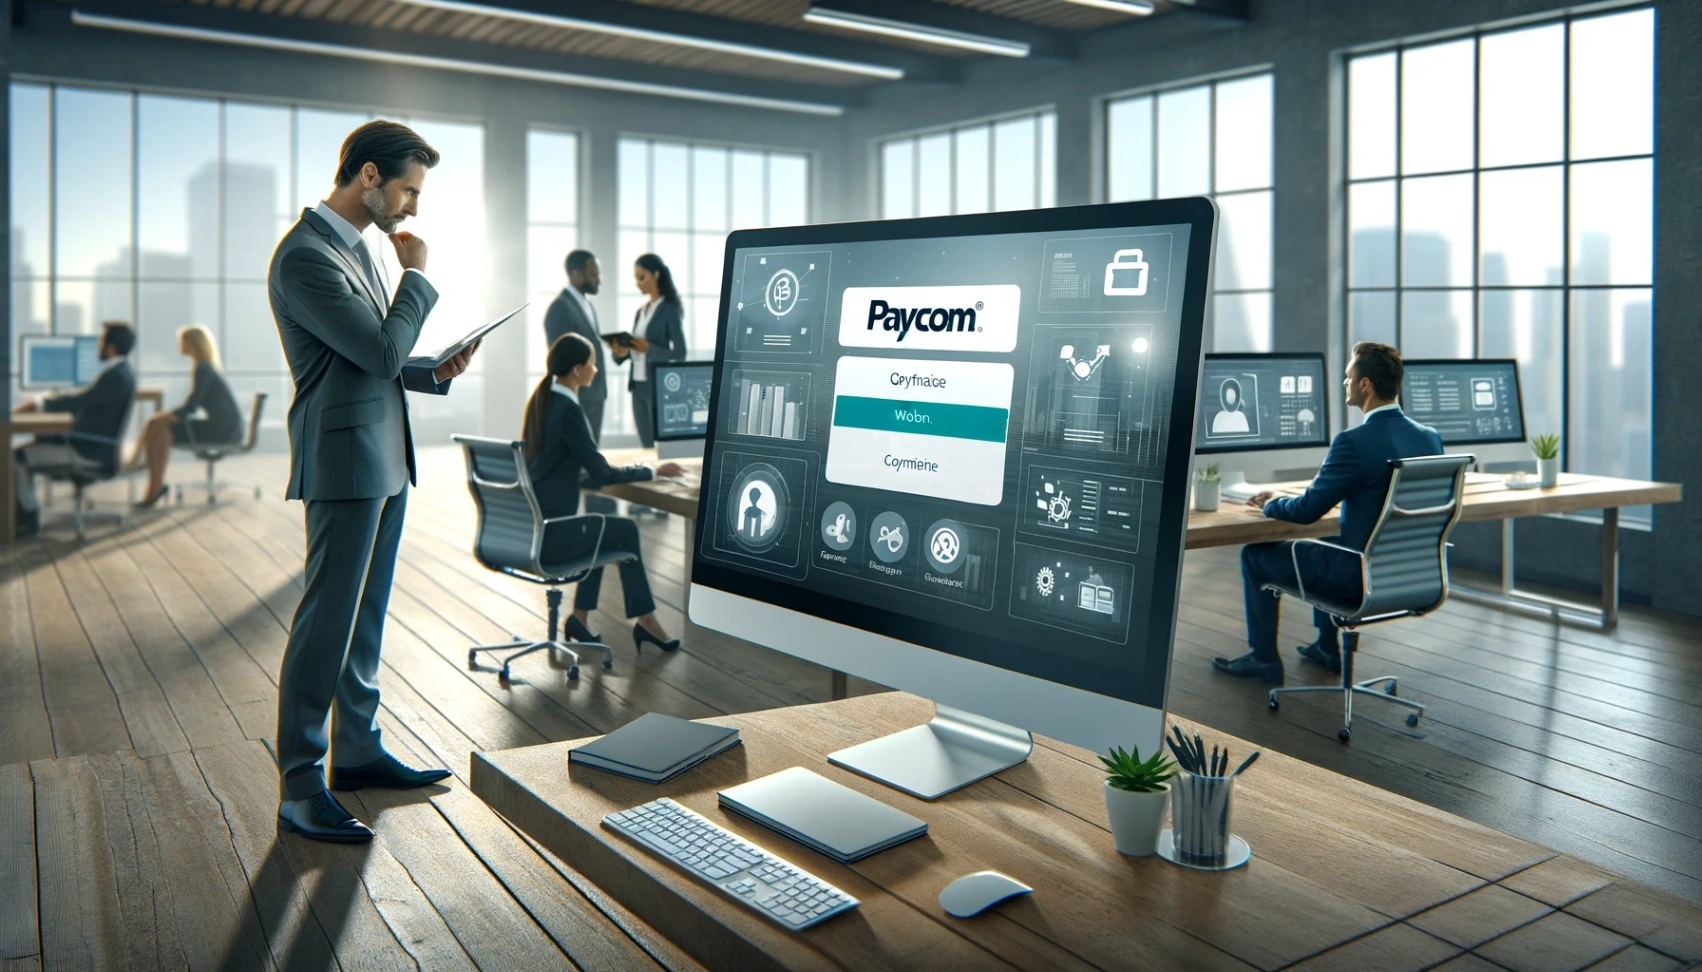 Paycom: Employee Self-Service Online - How to Apply Online